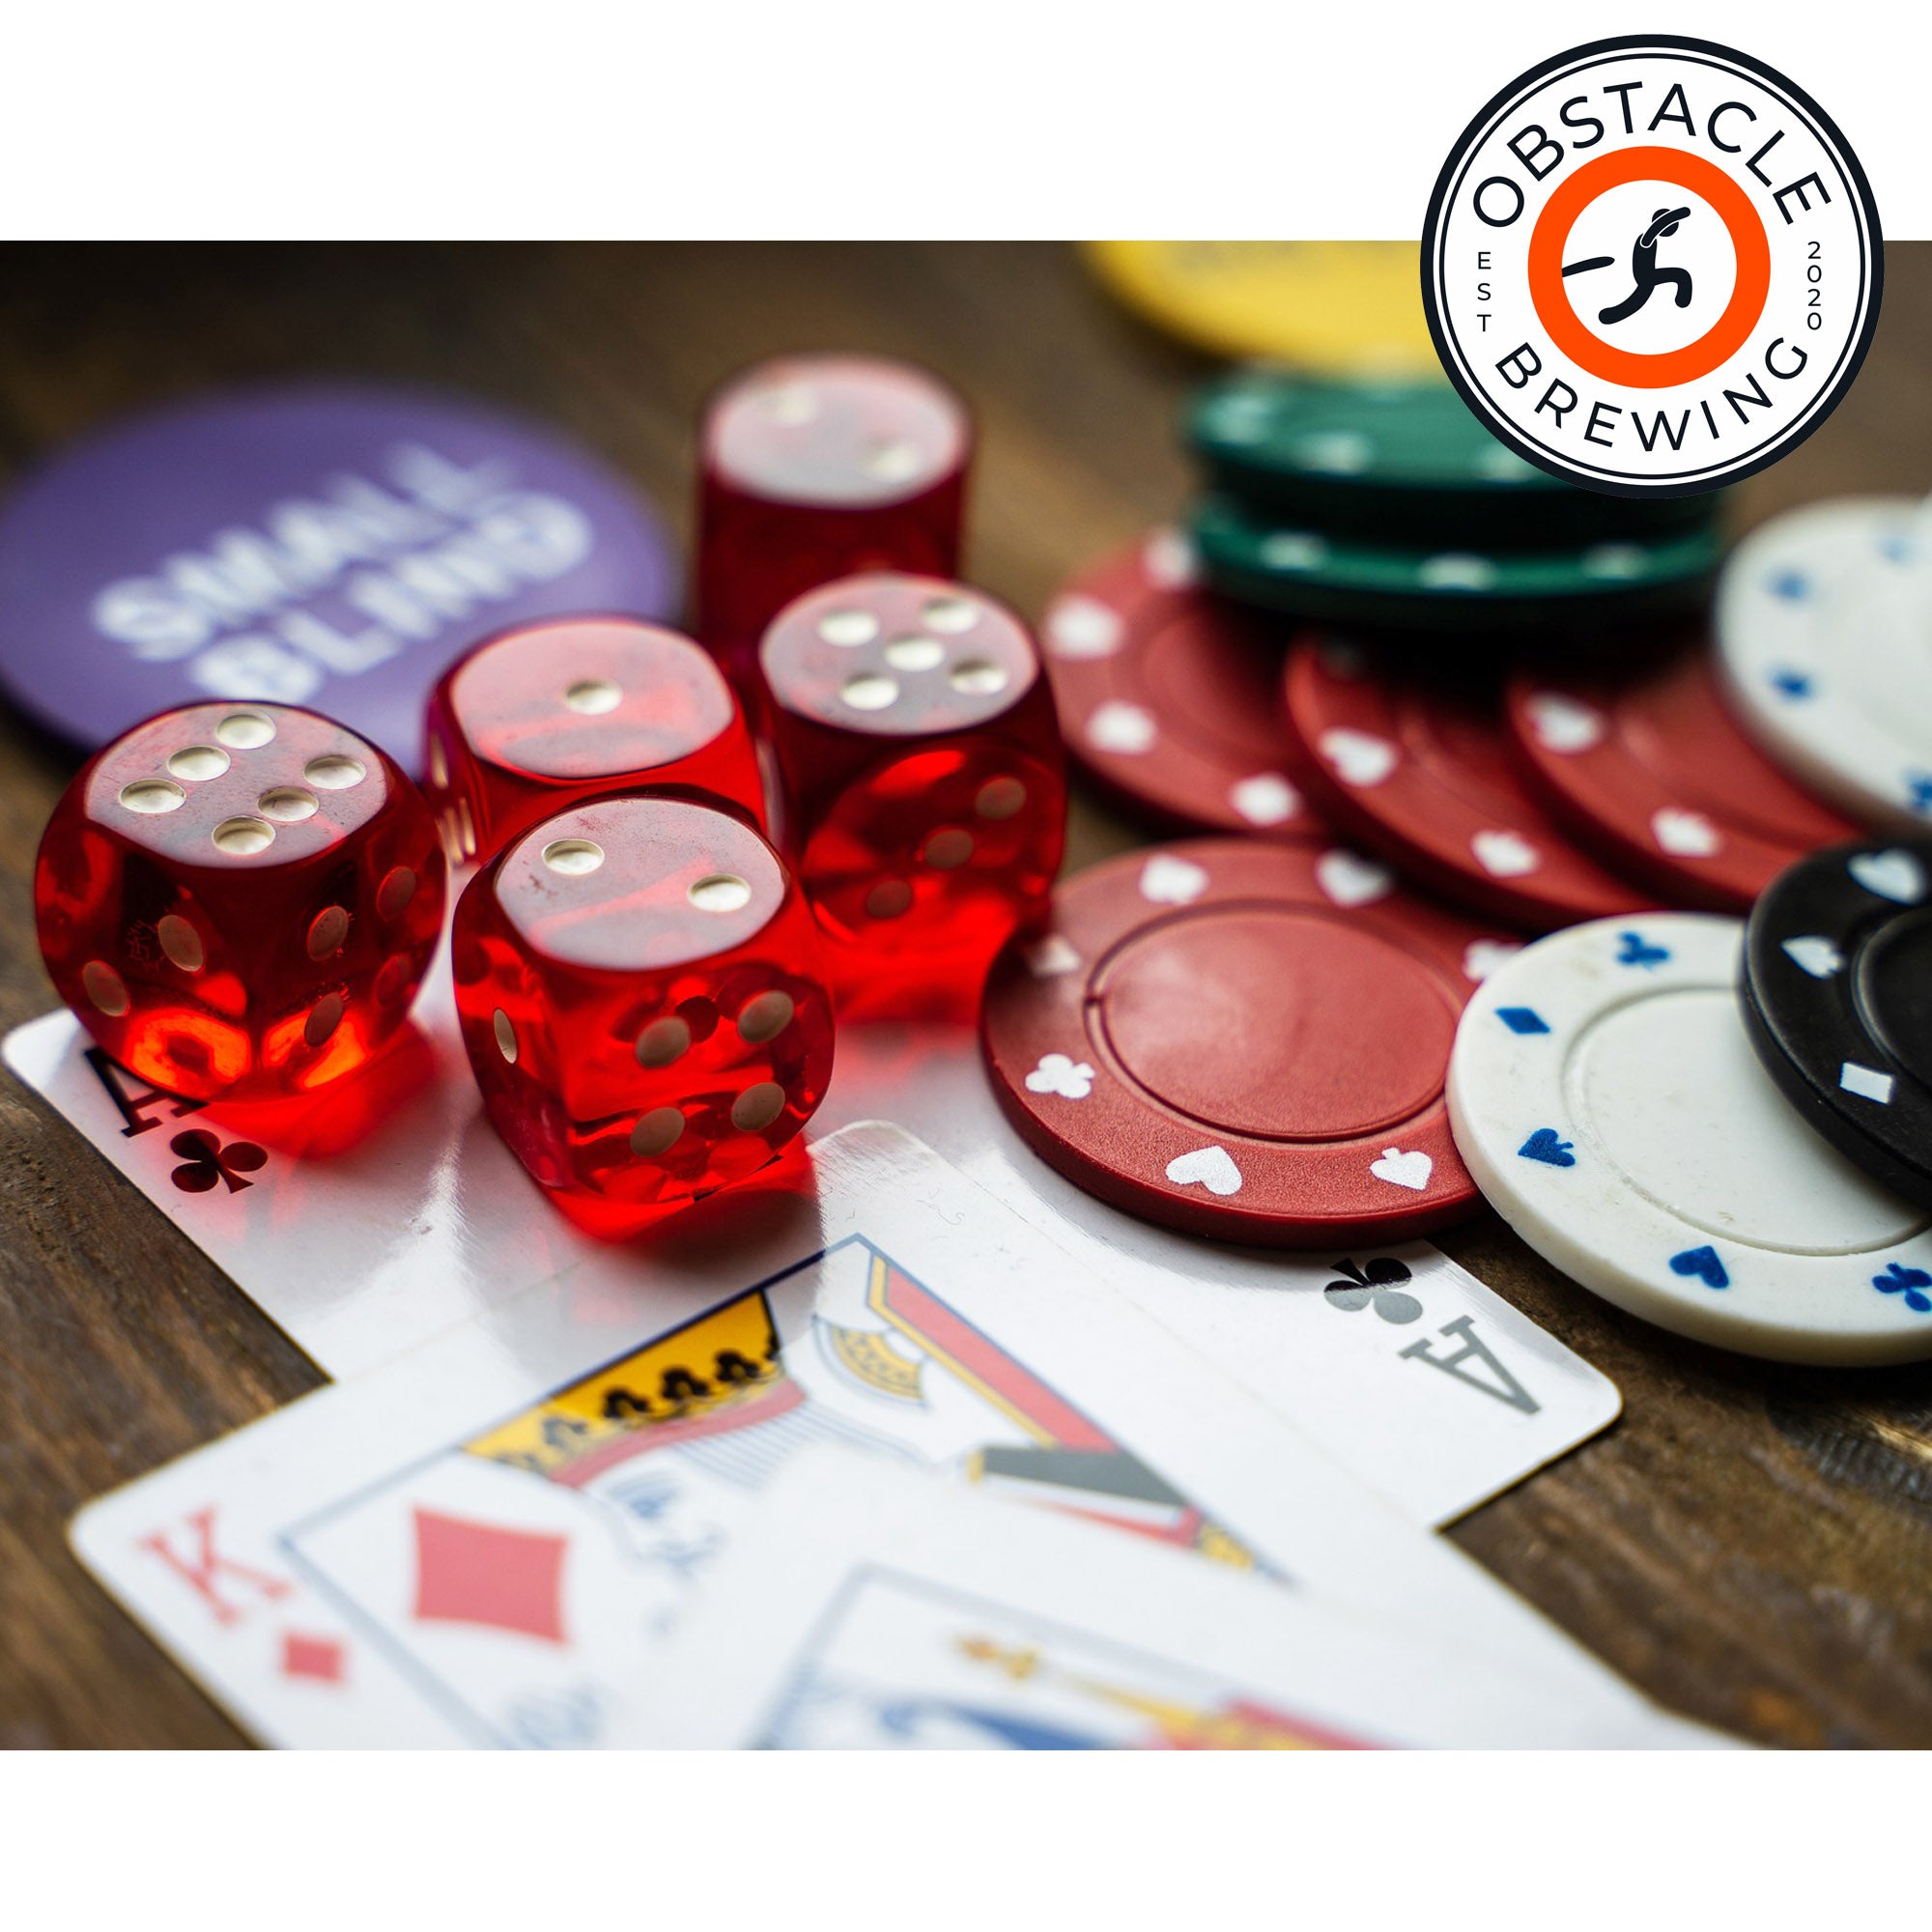 The Art of Poker at Obstacle Brewing - Wed 5.1.24 @ 6:00P